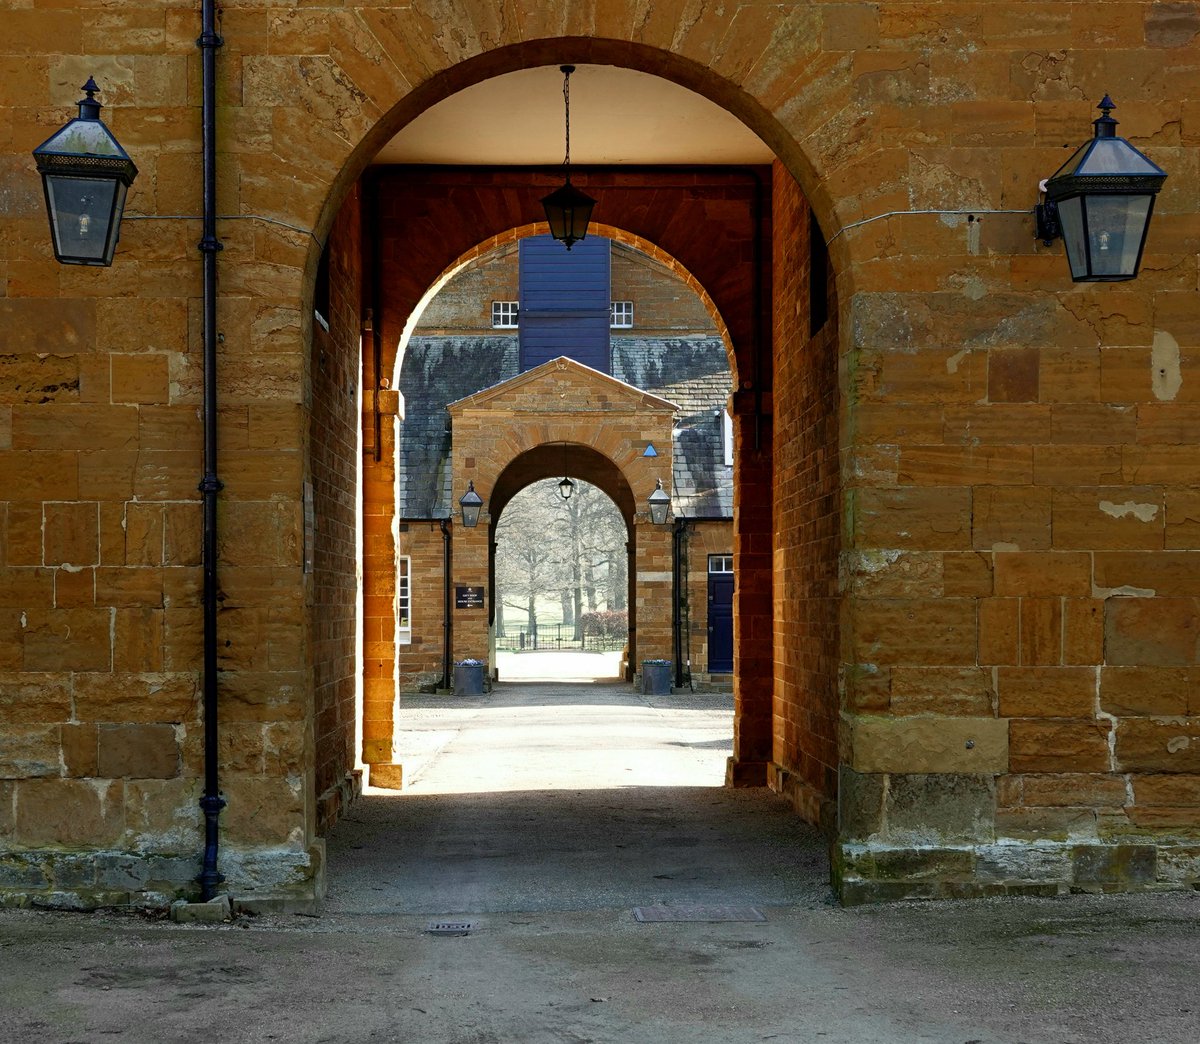 West arch leading into the magnificent Stables courtyard @AlthorpHouse 
Built in the early 1730's in local ironstone and designed by Roger Morris b.1695 - d.1749 who was associated with Colen Campell and Henry Herbert. 
Conservation@althorp.com #Althorpestate #Spencerestates